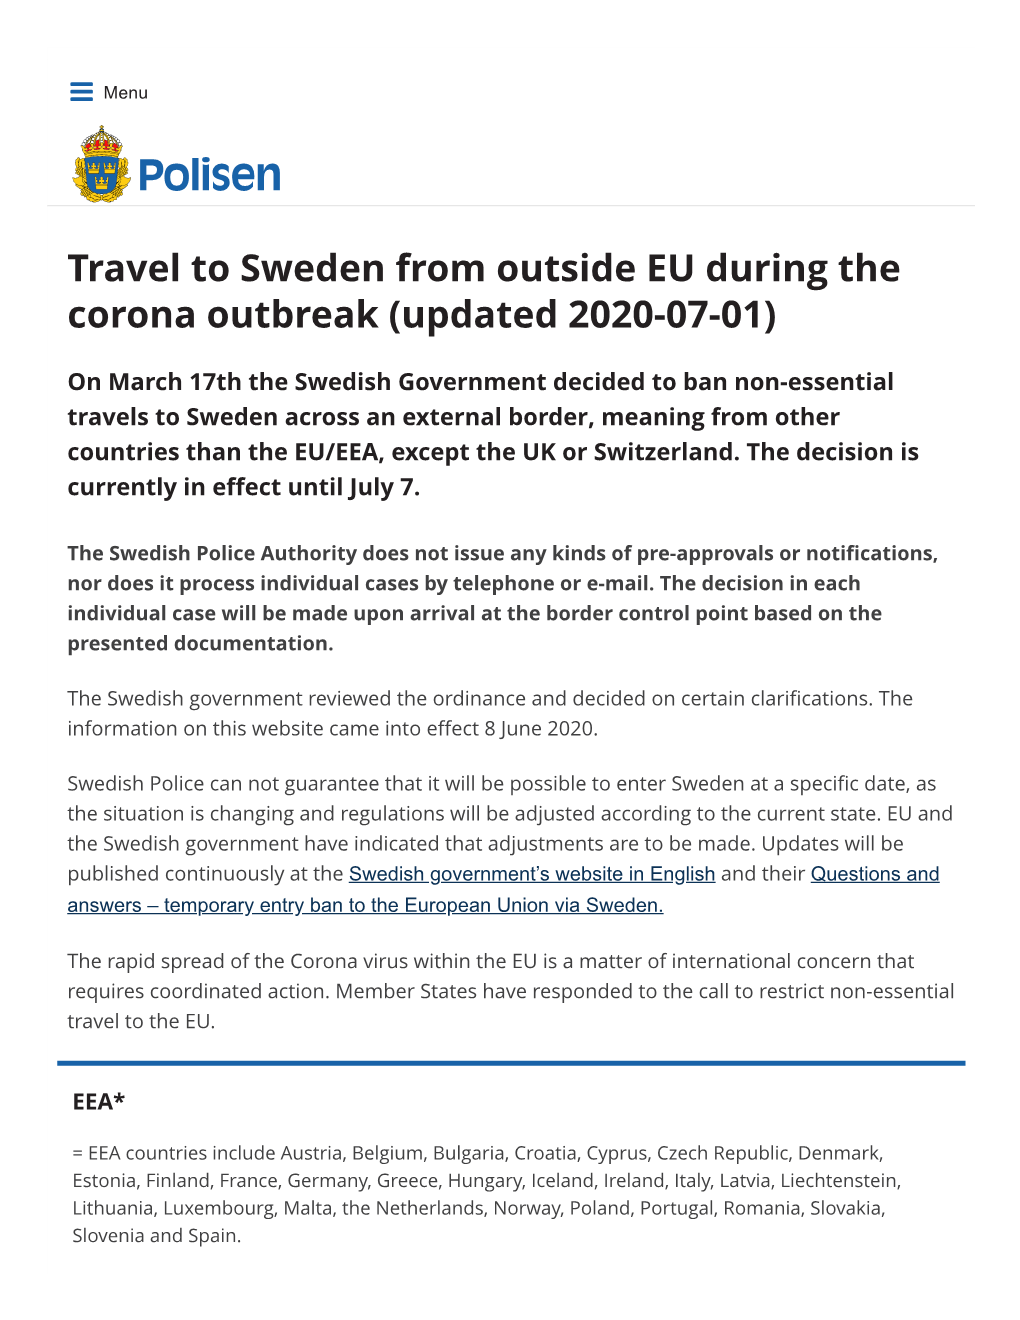 Travel to Sweden from Outside EU During the Corona Outbreak (Updated 2020-07-01)